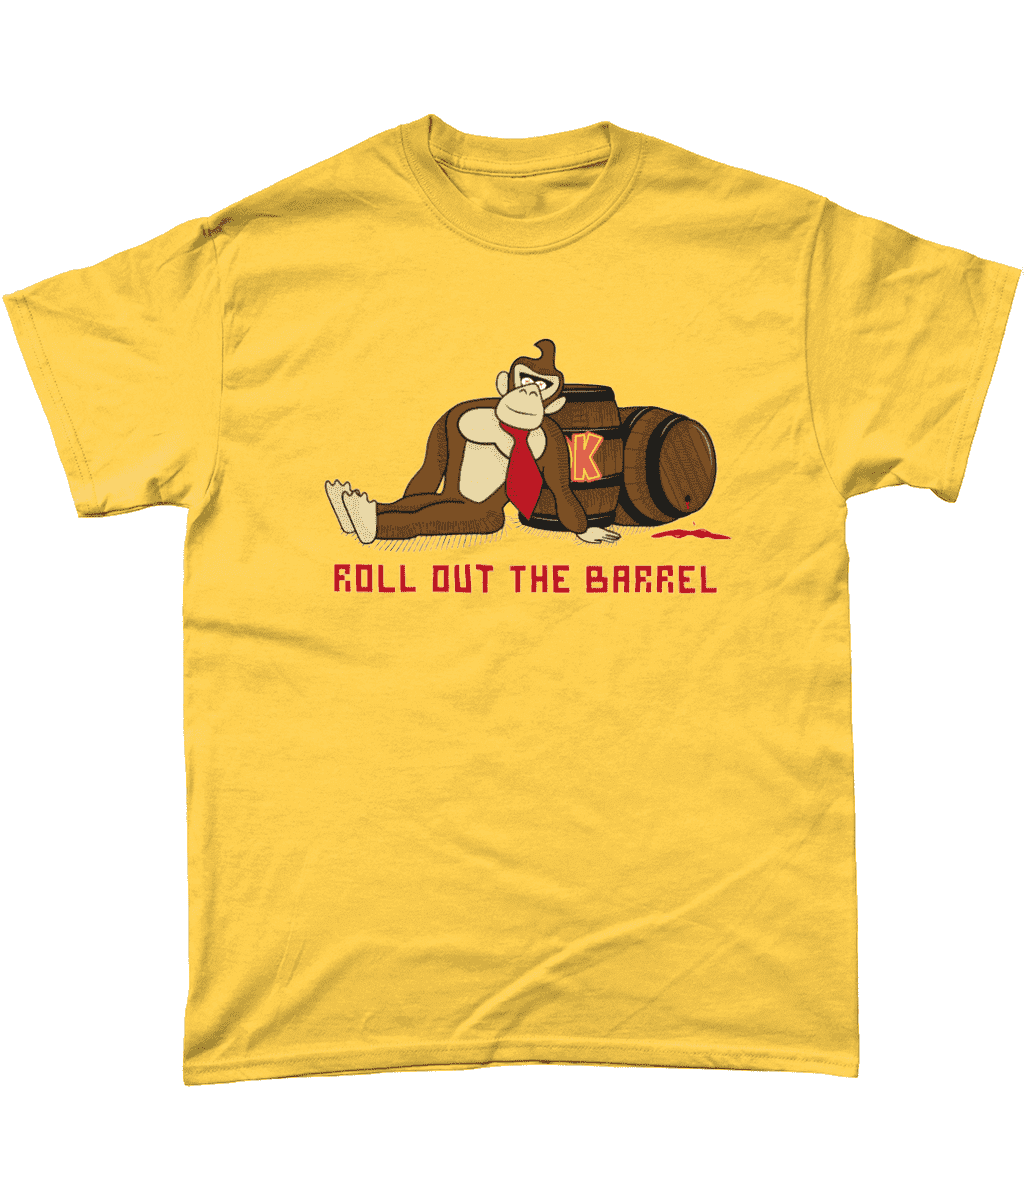  Brewers Roll Out The Barrel T-Shirt : Clothing, Shoes & Jewelry